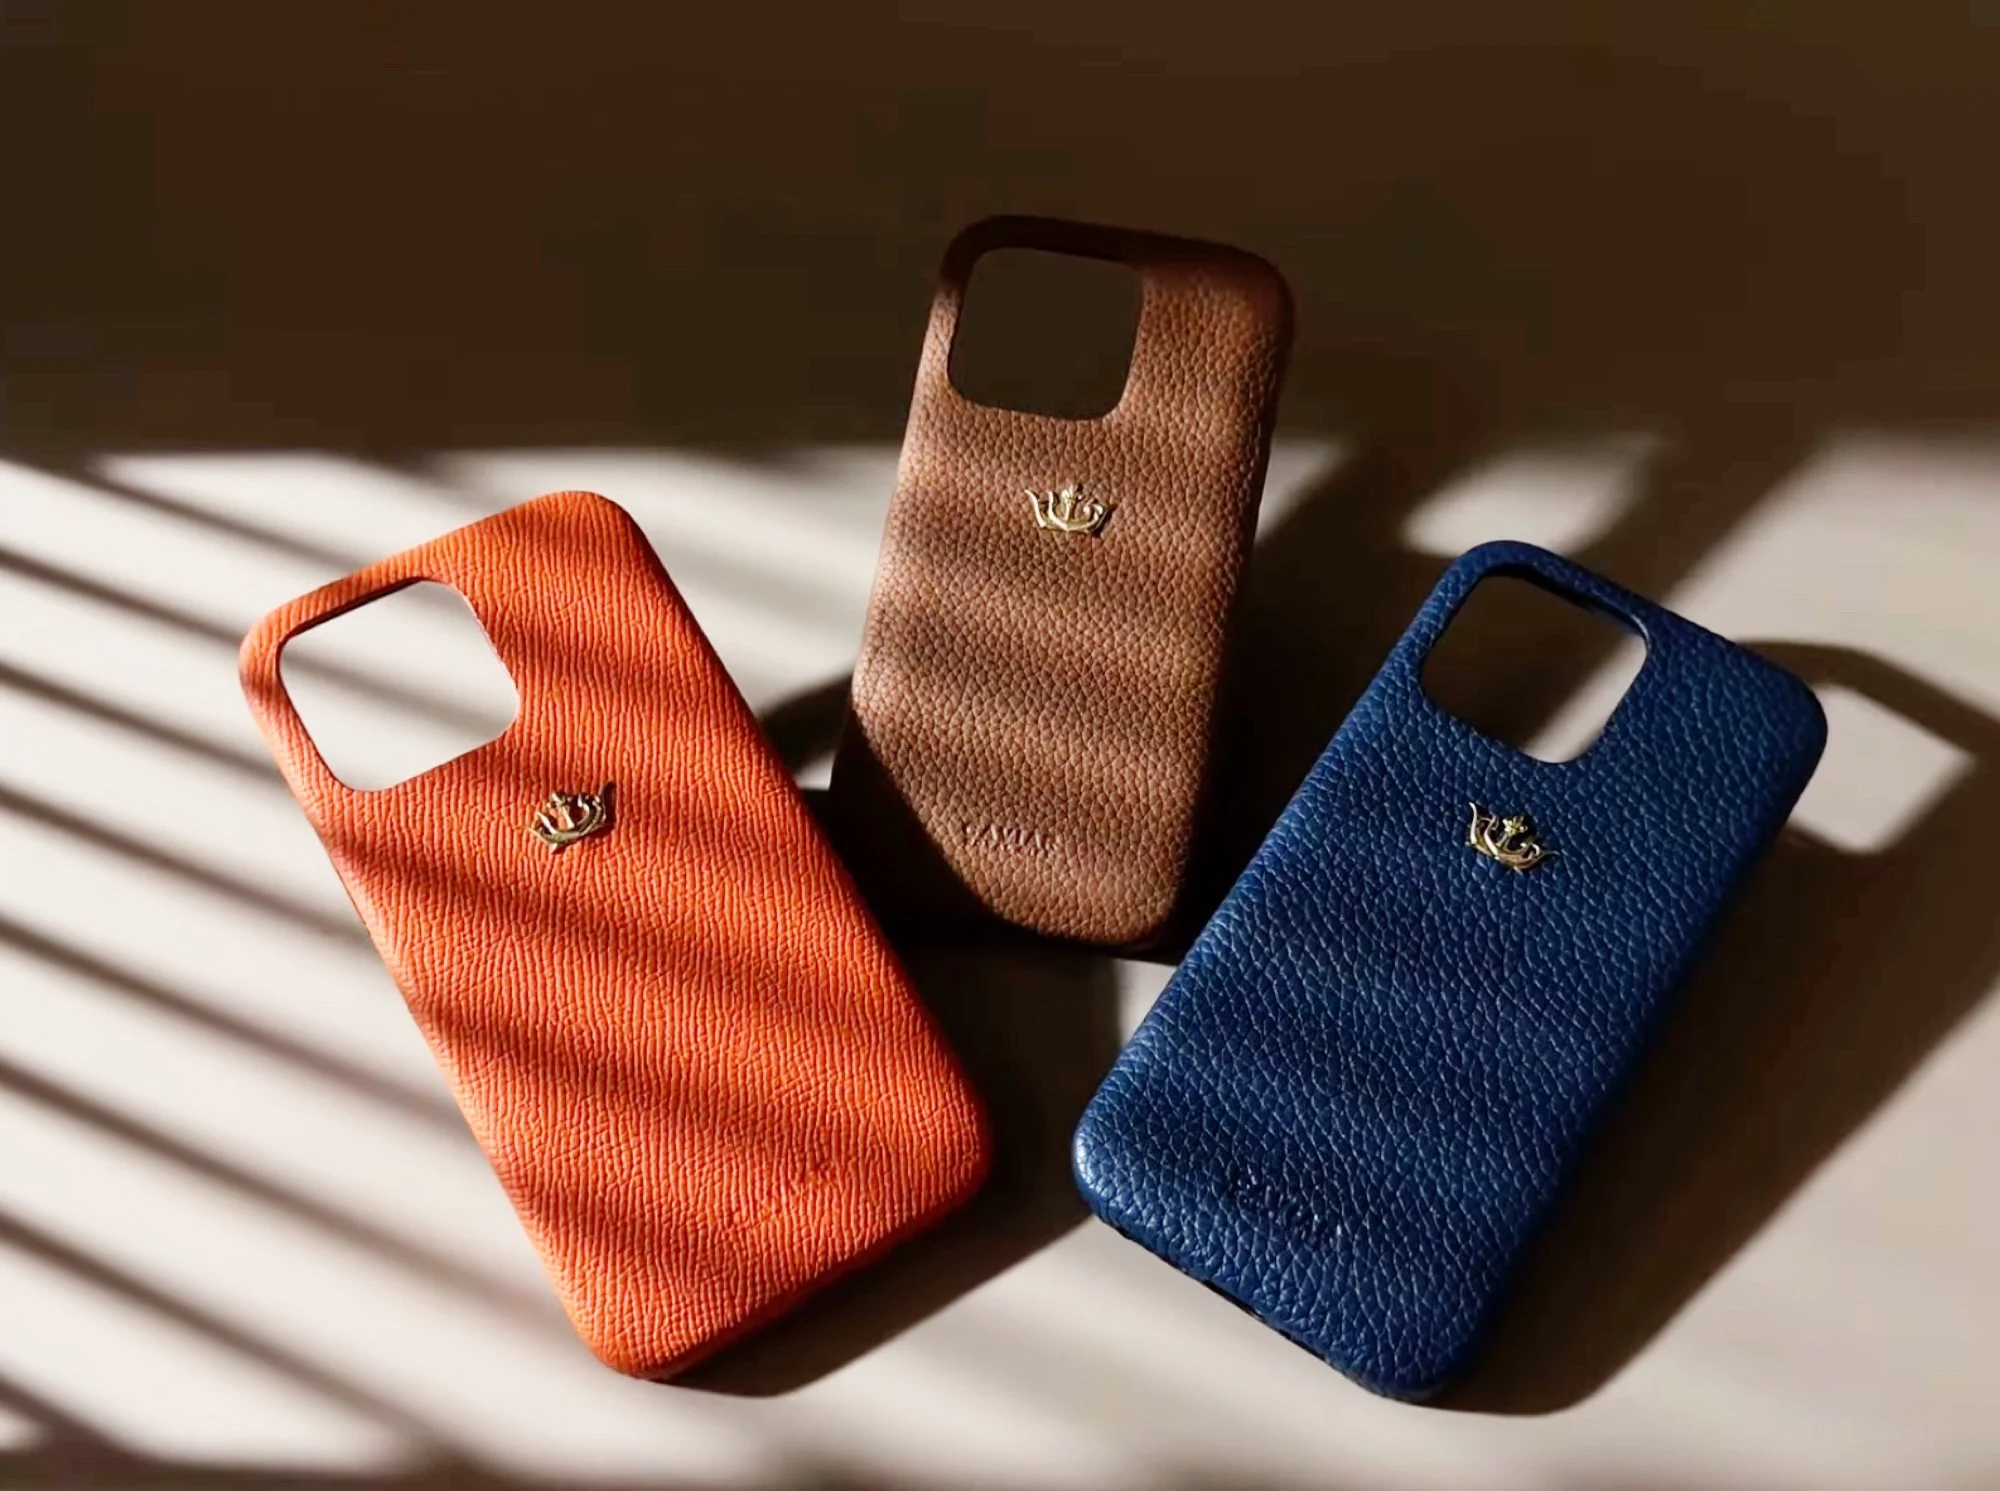 Caviar presented cases for iPhone. They cost more than the smartphones themselves